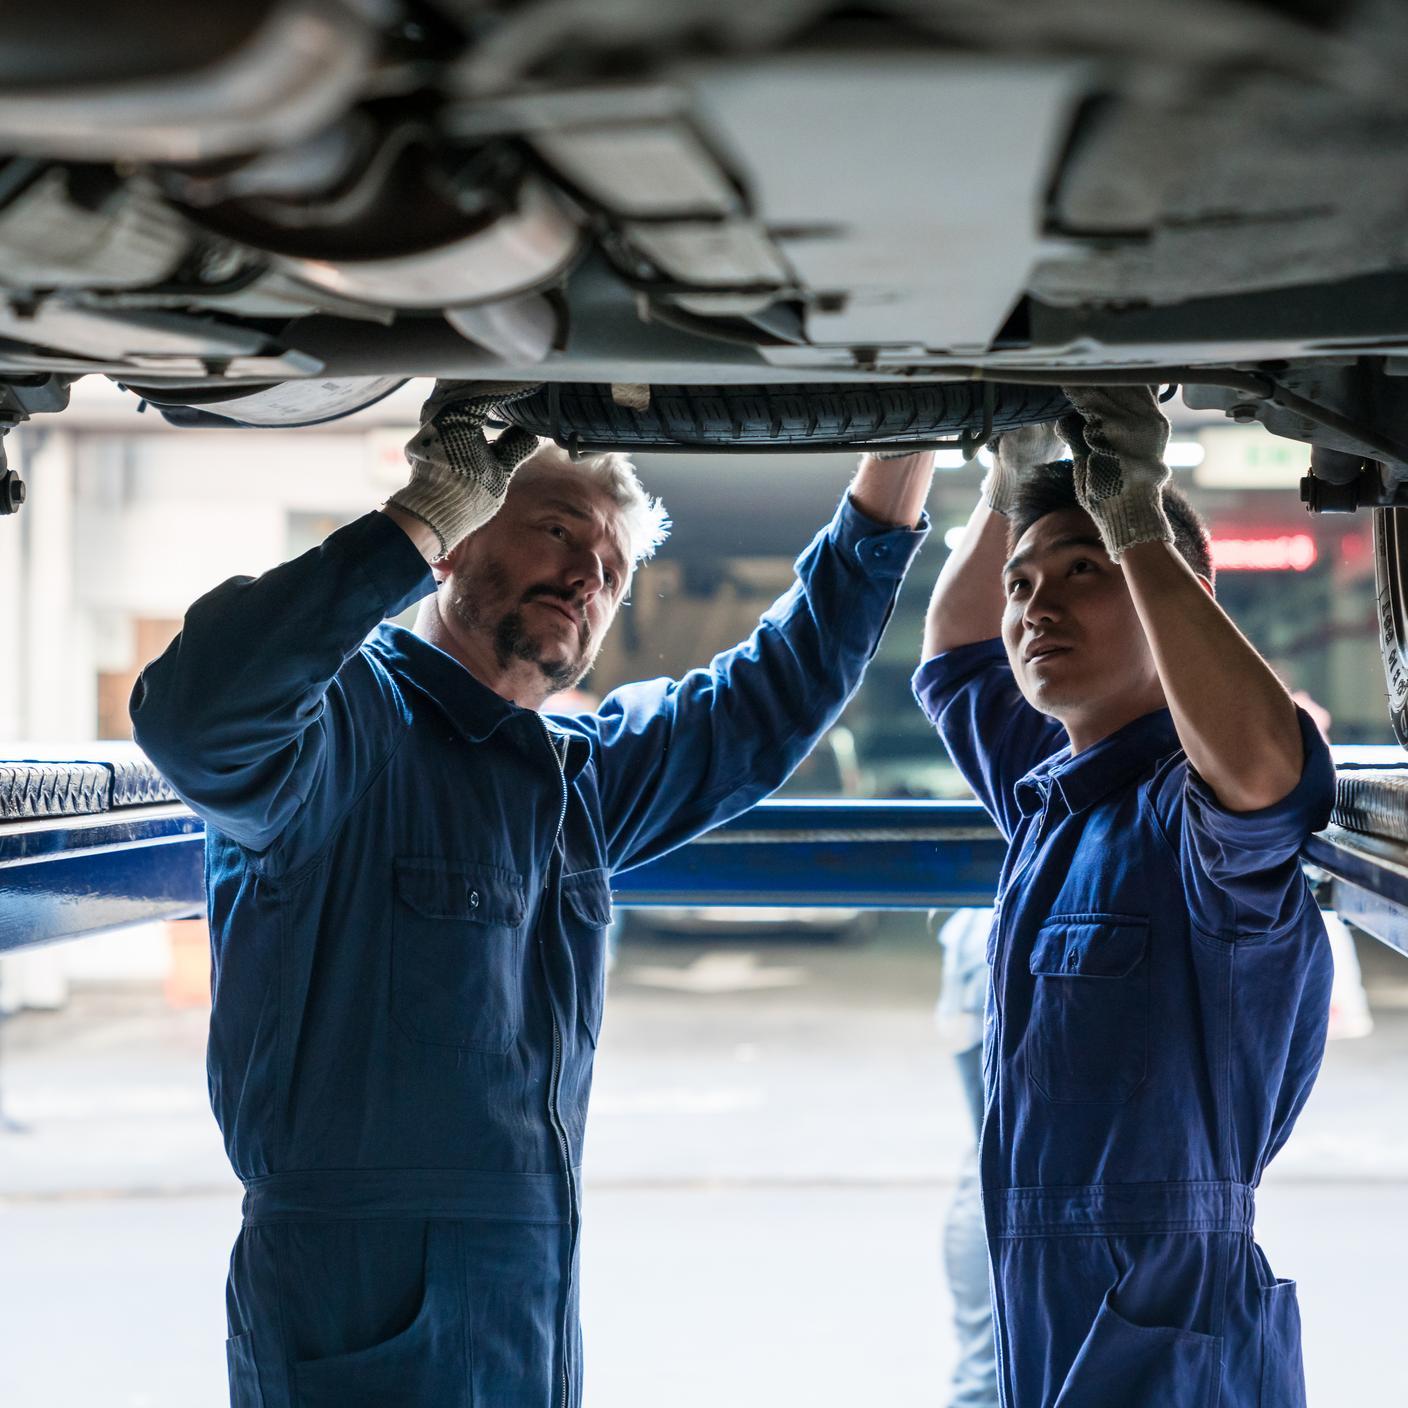 Automotive - Mechanic and apprentice checking vehicle chassis